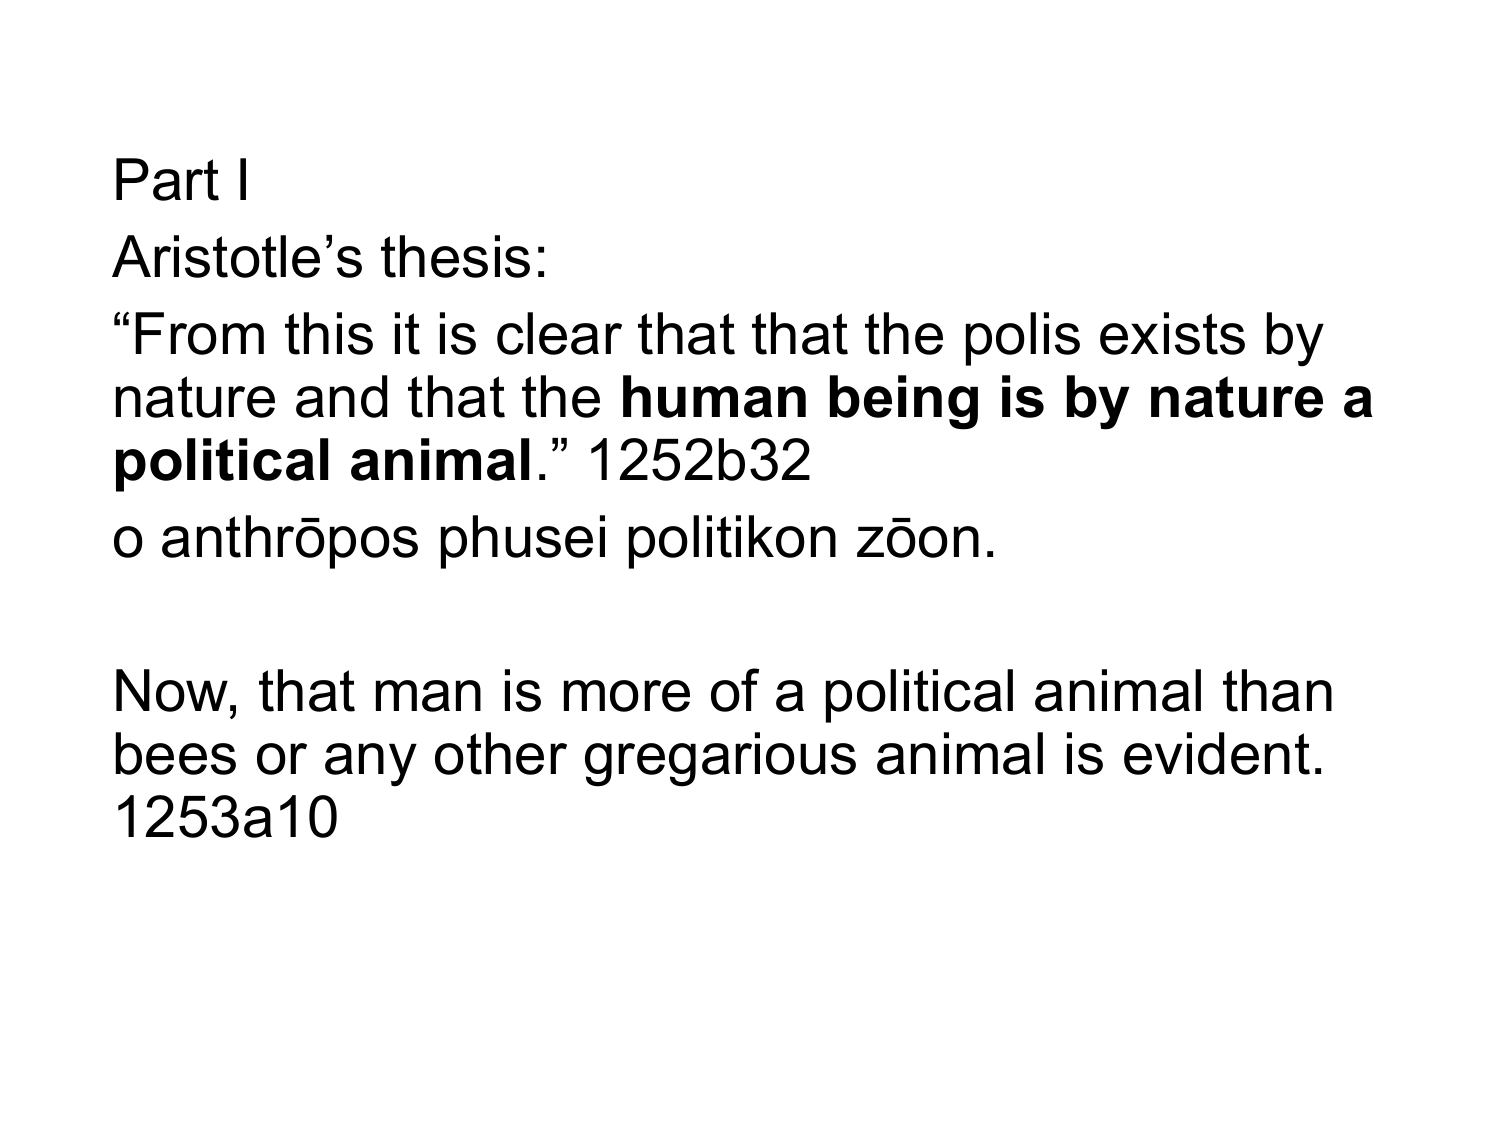 human being is by nature a political animal